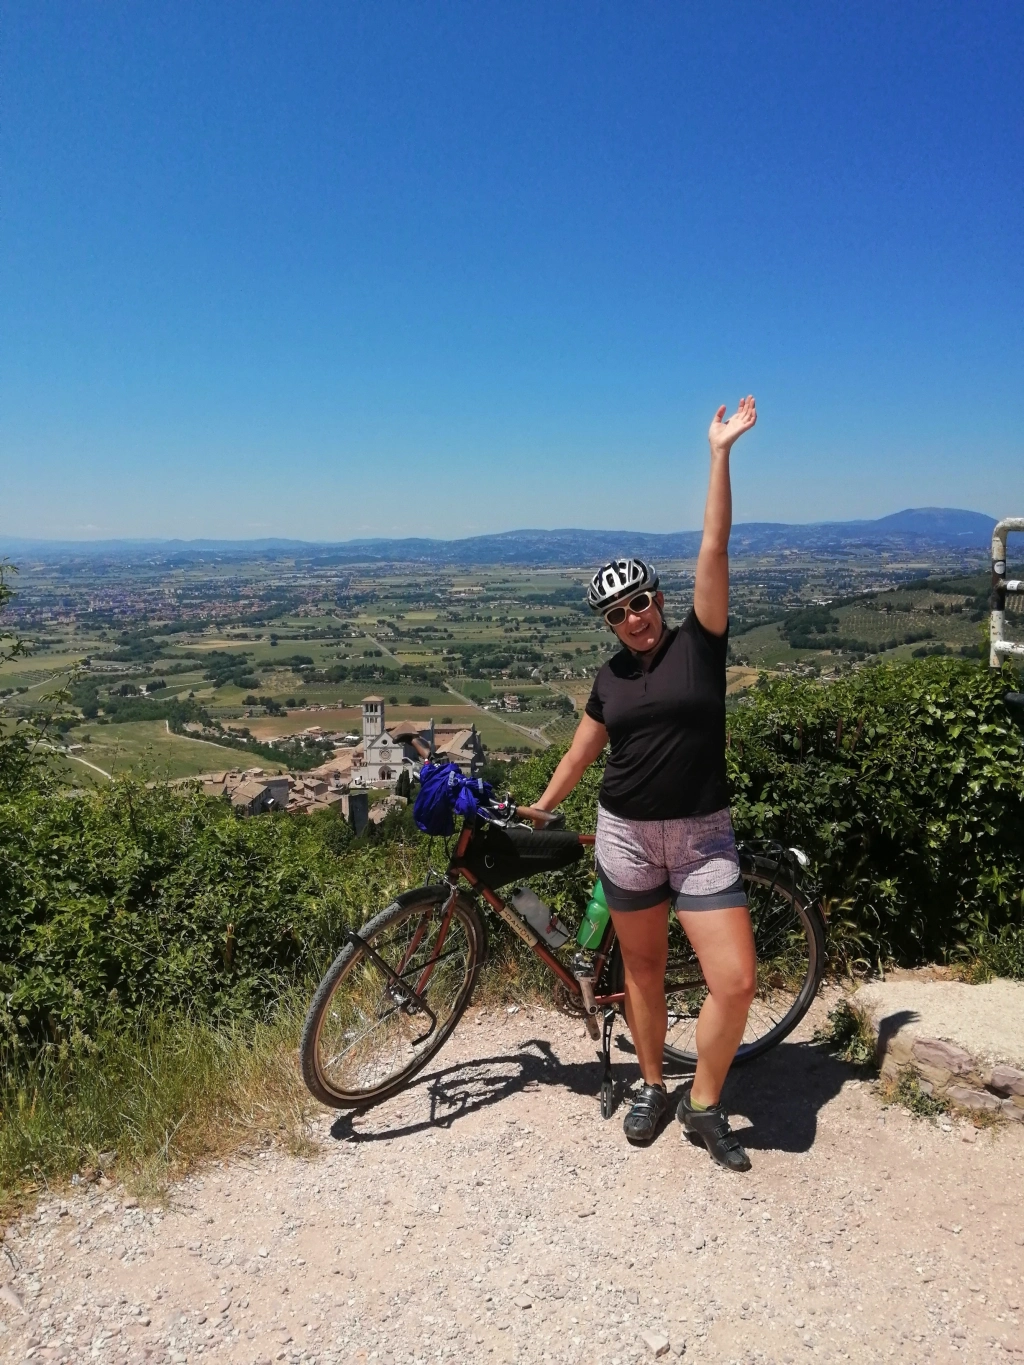 Umbria or Bust: Exploring New Bits of Italy by Bike